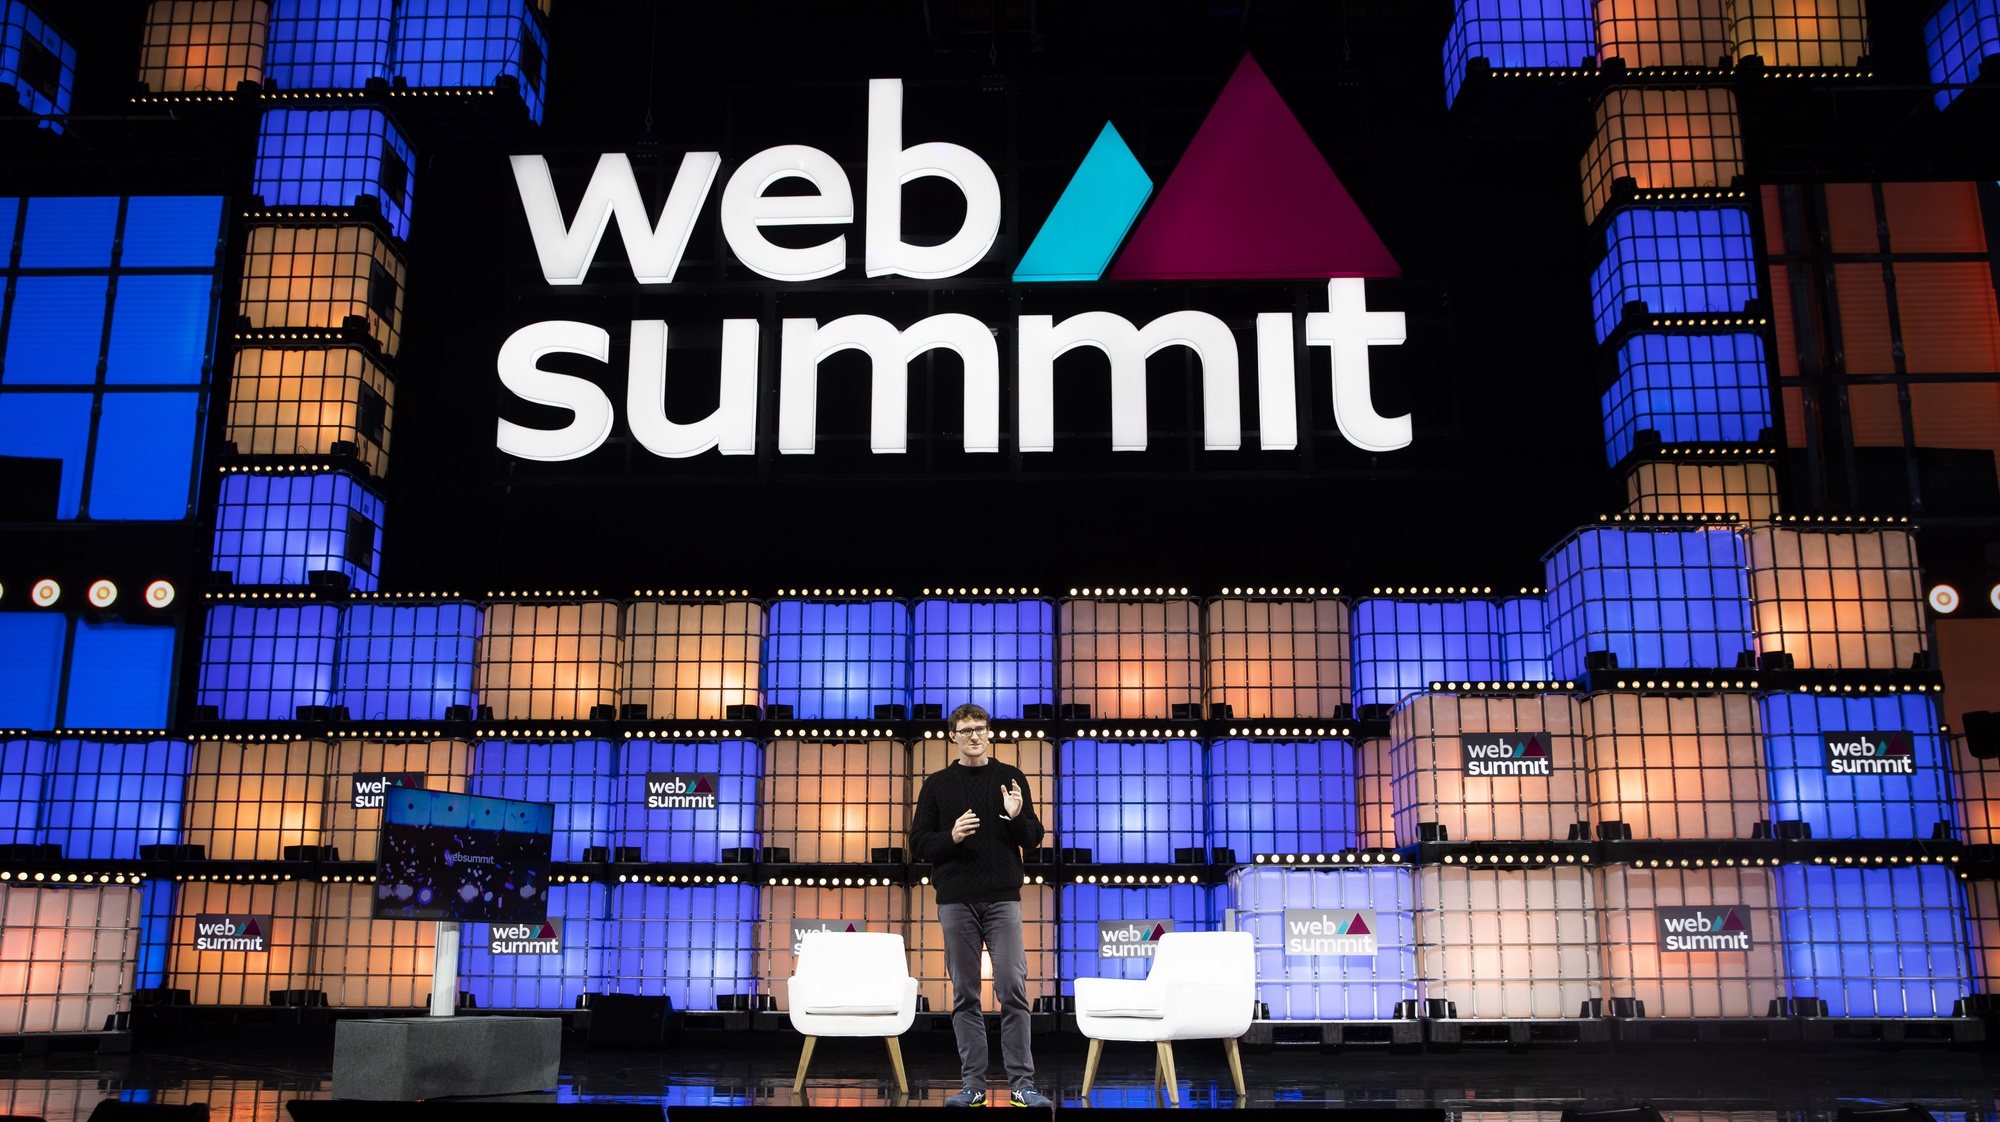 The founder and president of Web Summit, Paddy Cosgrave, delivers the closing remarks of the 2022 Web Summit, Parque das Nacoes, Lisbon, Portugal, 04 November 2022. The Web Summit is considered the largest event of startups and technological entrepreneurship in the world, takes place from 1 to 4 of November in Lisbon. JOSÉ SENA GOULAO/LUSA